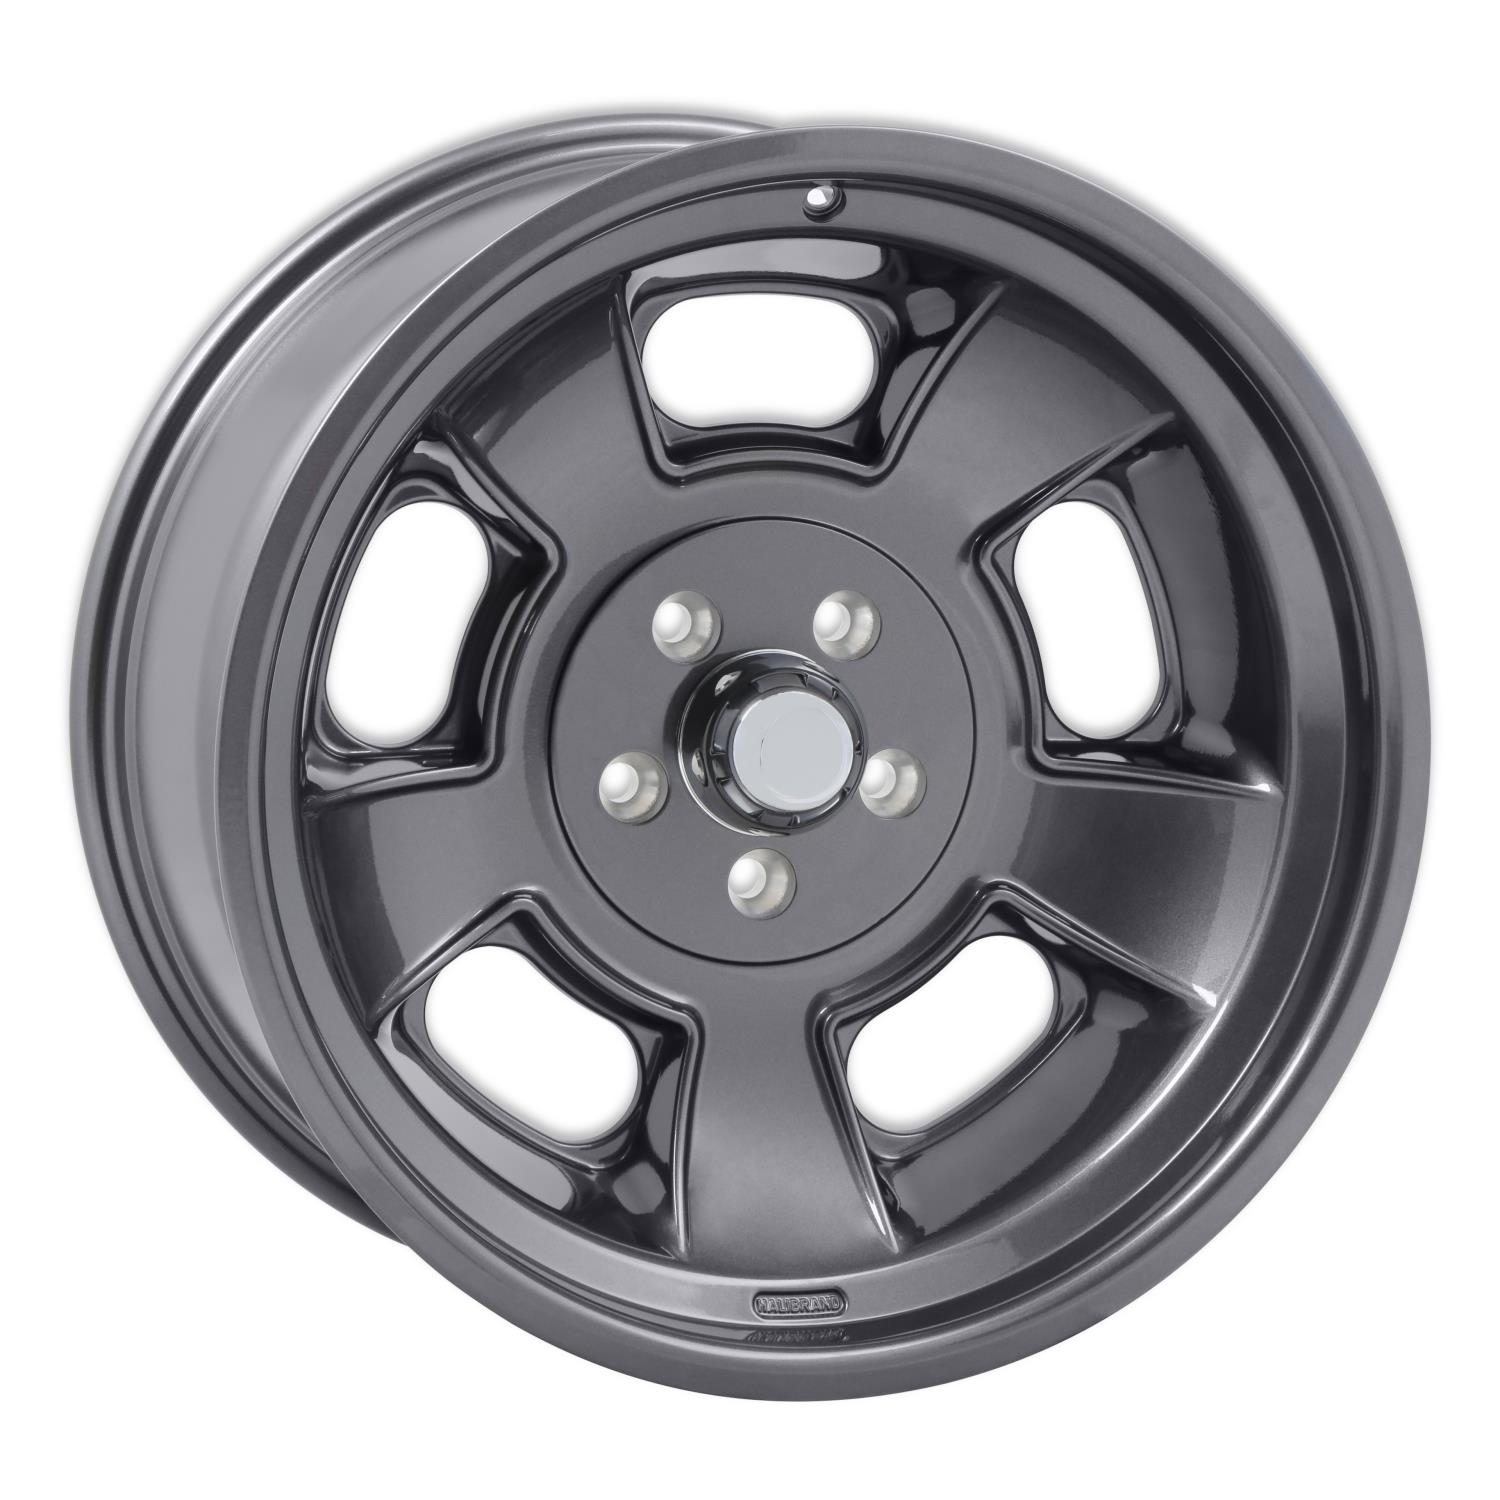 Sprint Rear Wheel, Size: 20x10", Bolt Pattern: 5x5", Backspace: 5.5" [Anthracite - Gloss Clearcoat]